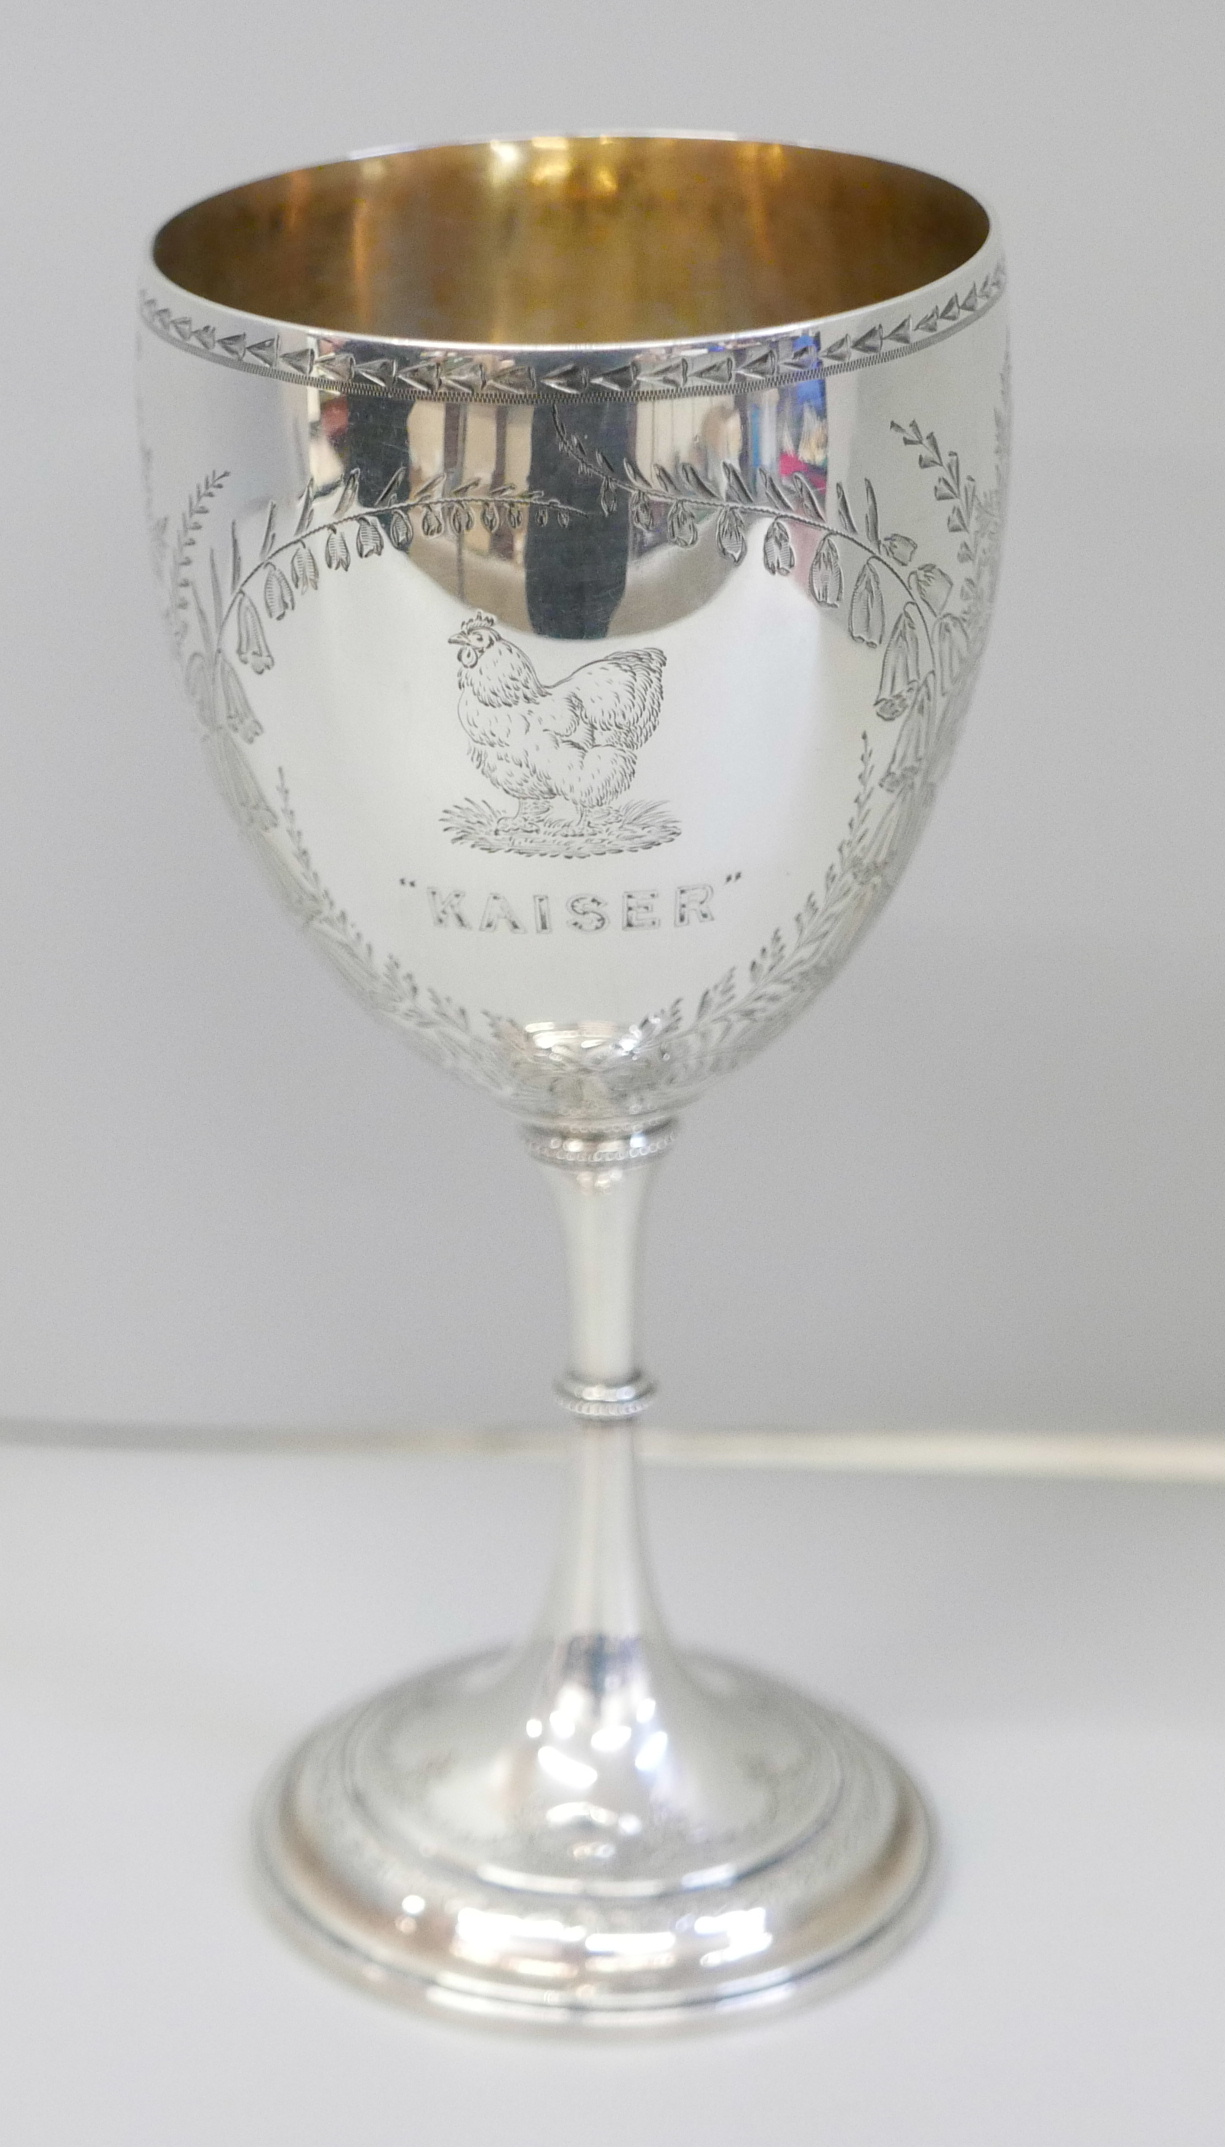 A Victorian silver goblet with cockerel detail and marked 'Kaiser', London 1856, Elkington & Co., - Image 3 of 6